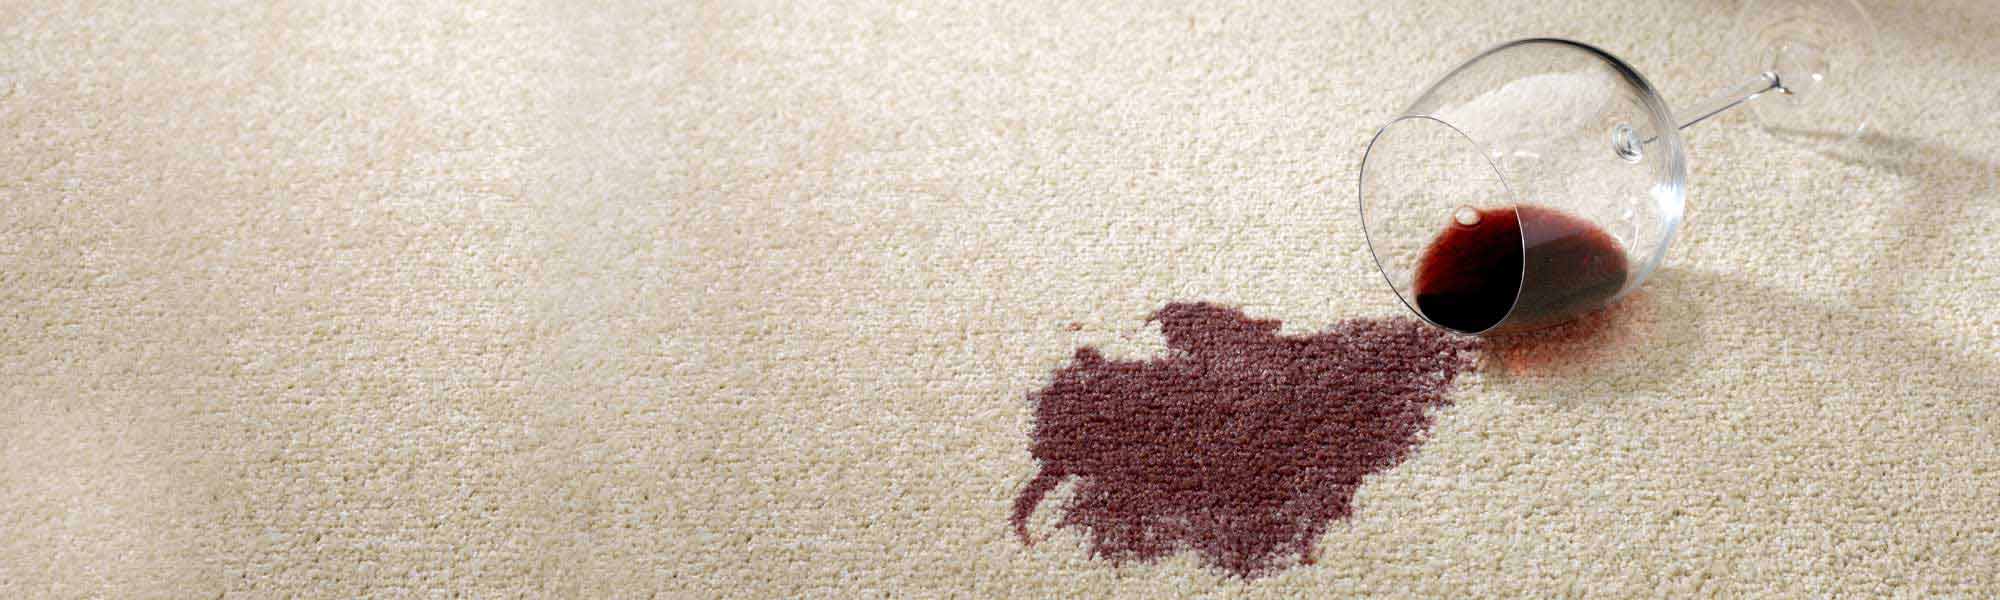 Our Specialty Stain Removal Service is so great that we can say with confidence, If we can't get it out. No one can!